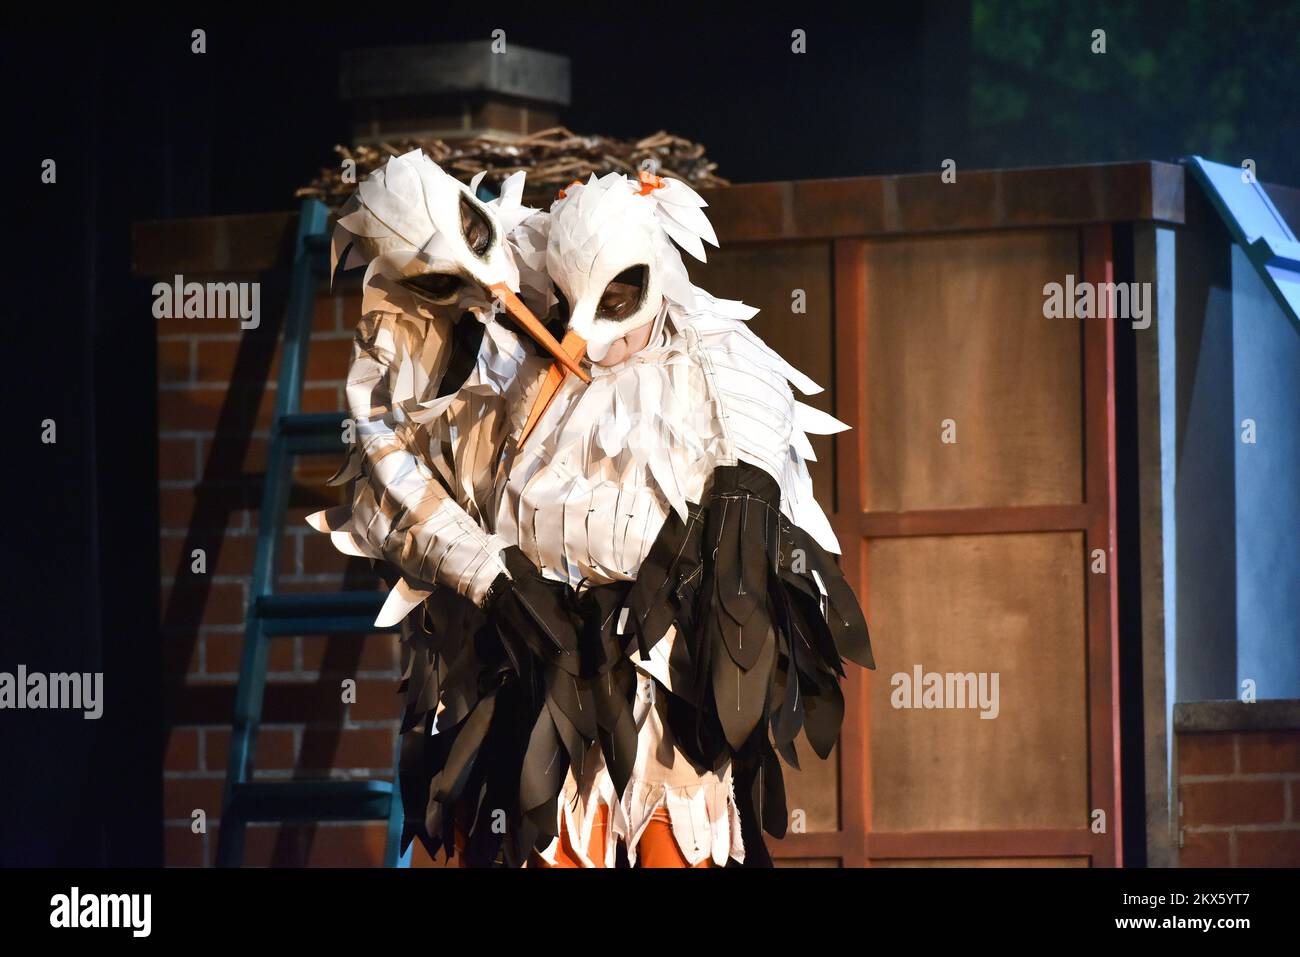 25.04.2018., Zagreb, Croatia - The remarkable love story of two long-legged birds from eastern Croatia, which has gone on for the last 16 years, has now been turned into a theatre play. â€˜Malena & Klepetan â€“ Love at first flapâ€™, written by Mirjana Piculjan Striga and directed by Zelimir Mesaric, at Zar Ptica theatre. The love story of storks Klepetan and Malena has captured the hearts of many for 16 years now. The two storks made their nest on a chimney in Brodski Varos in eastern Croatia more than two decades ago. Photo: Davor Visnjic/PIXSELL Stock Photo